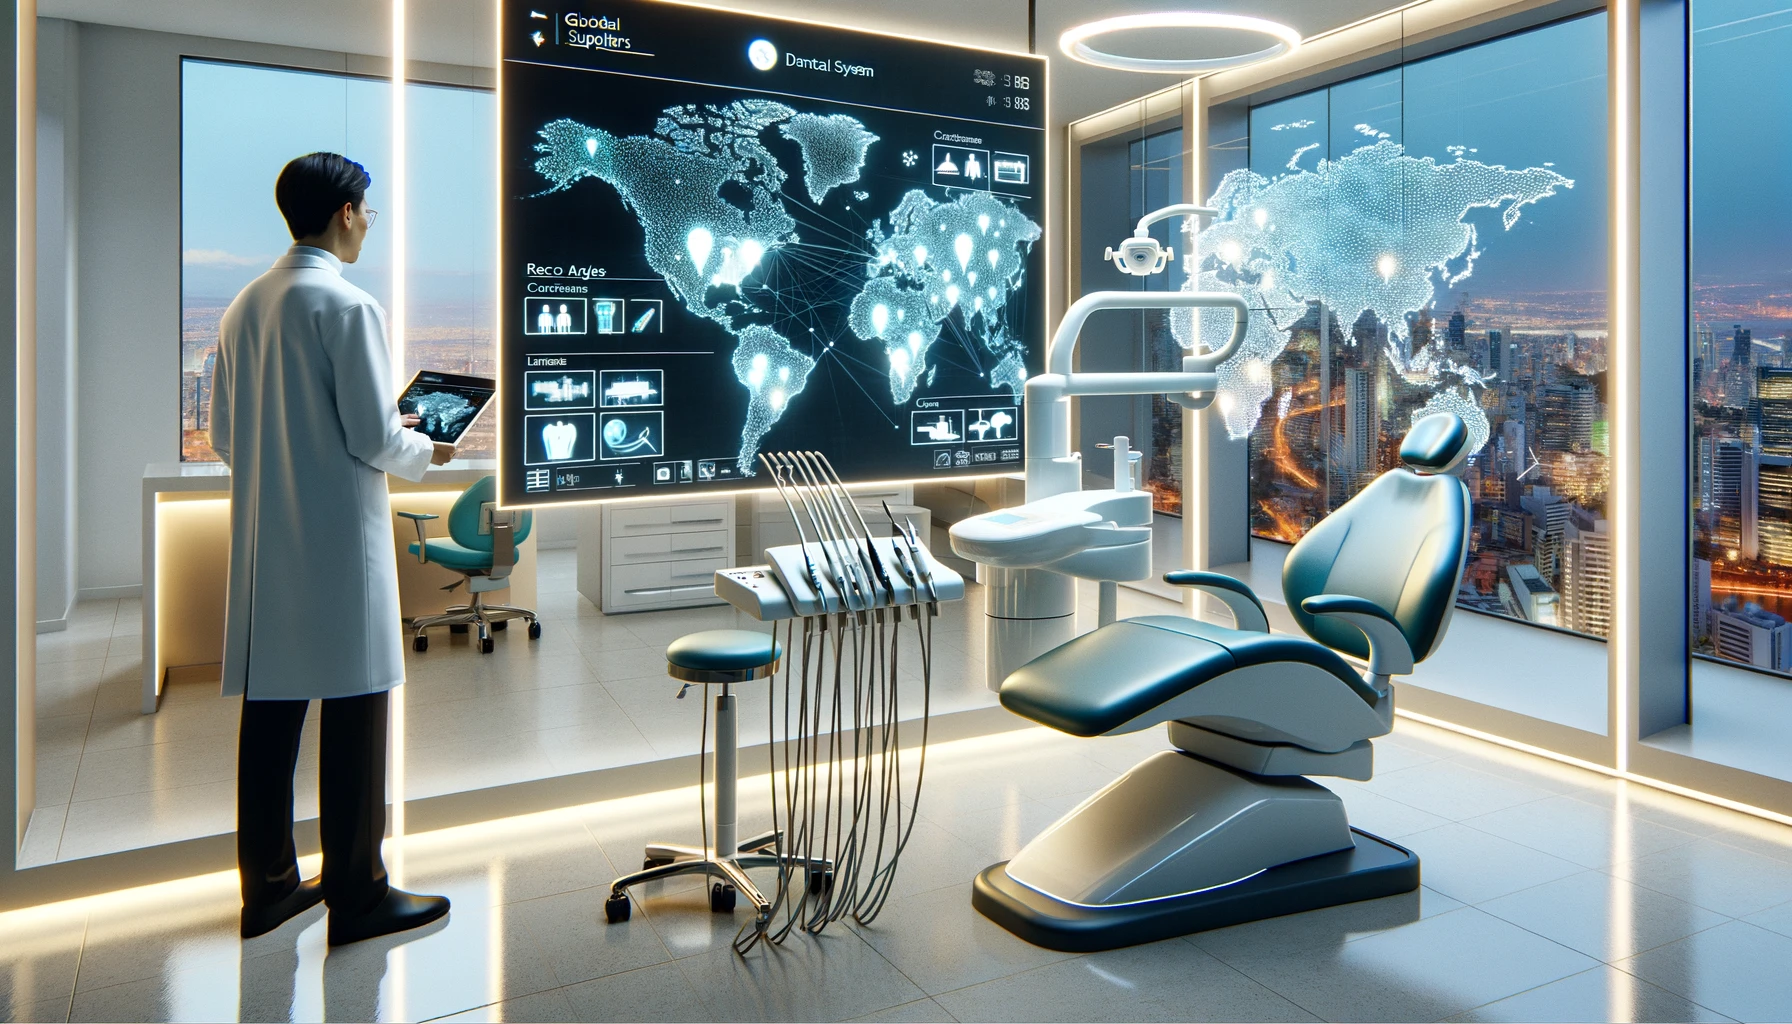 Dental Chair Control System Suppliers: A Comprehensive Guide